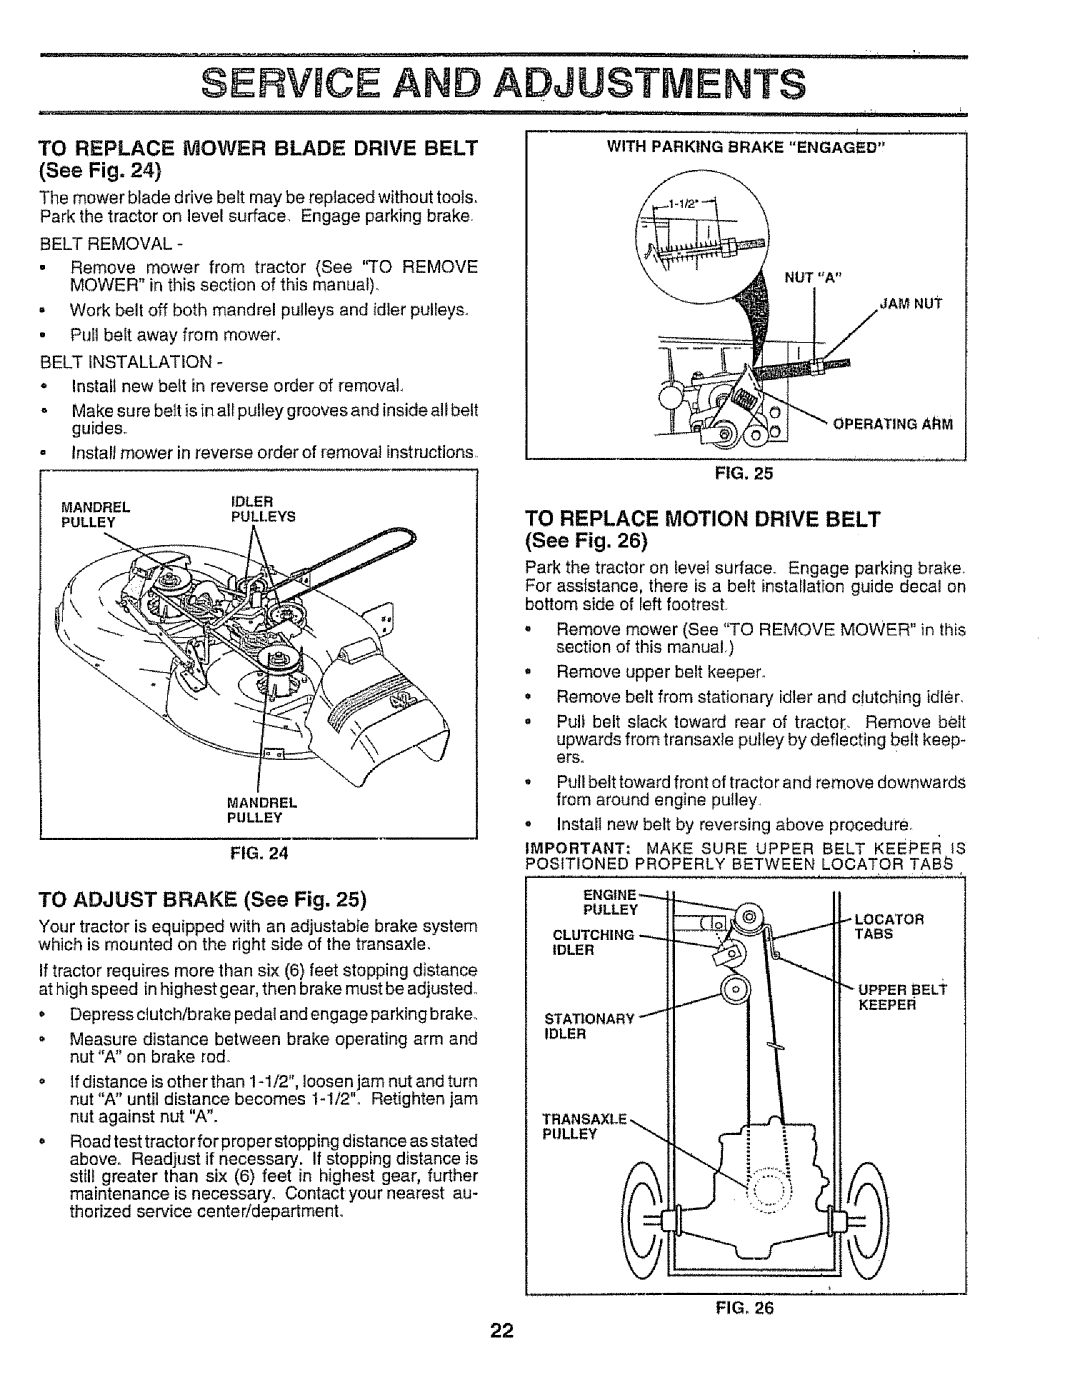 Sears 917.258542 owner manual Servsce And, Adjustments, Mower Blade Drive Belt, See Fig, To Replace Motion Drive Belt 